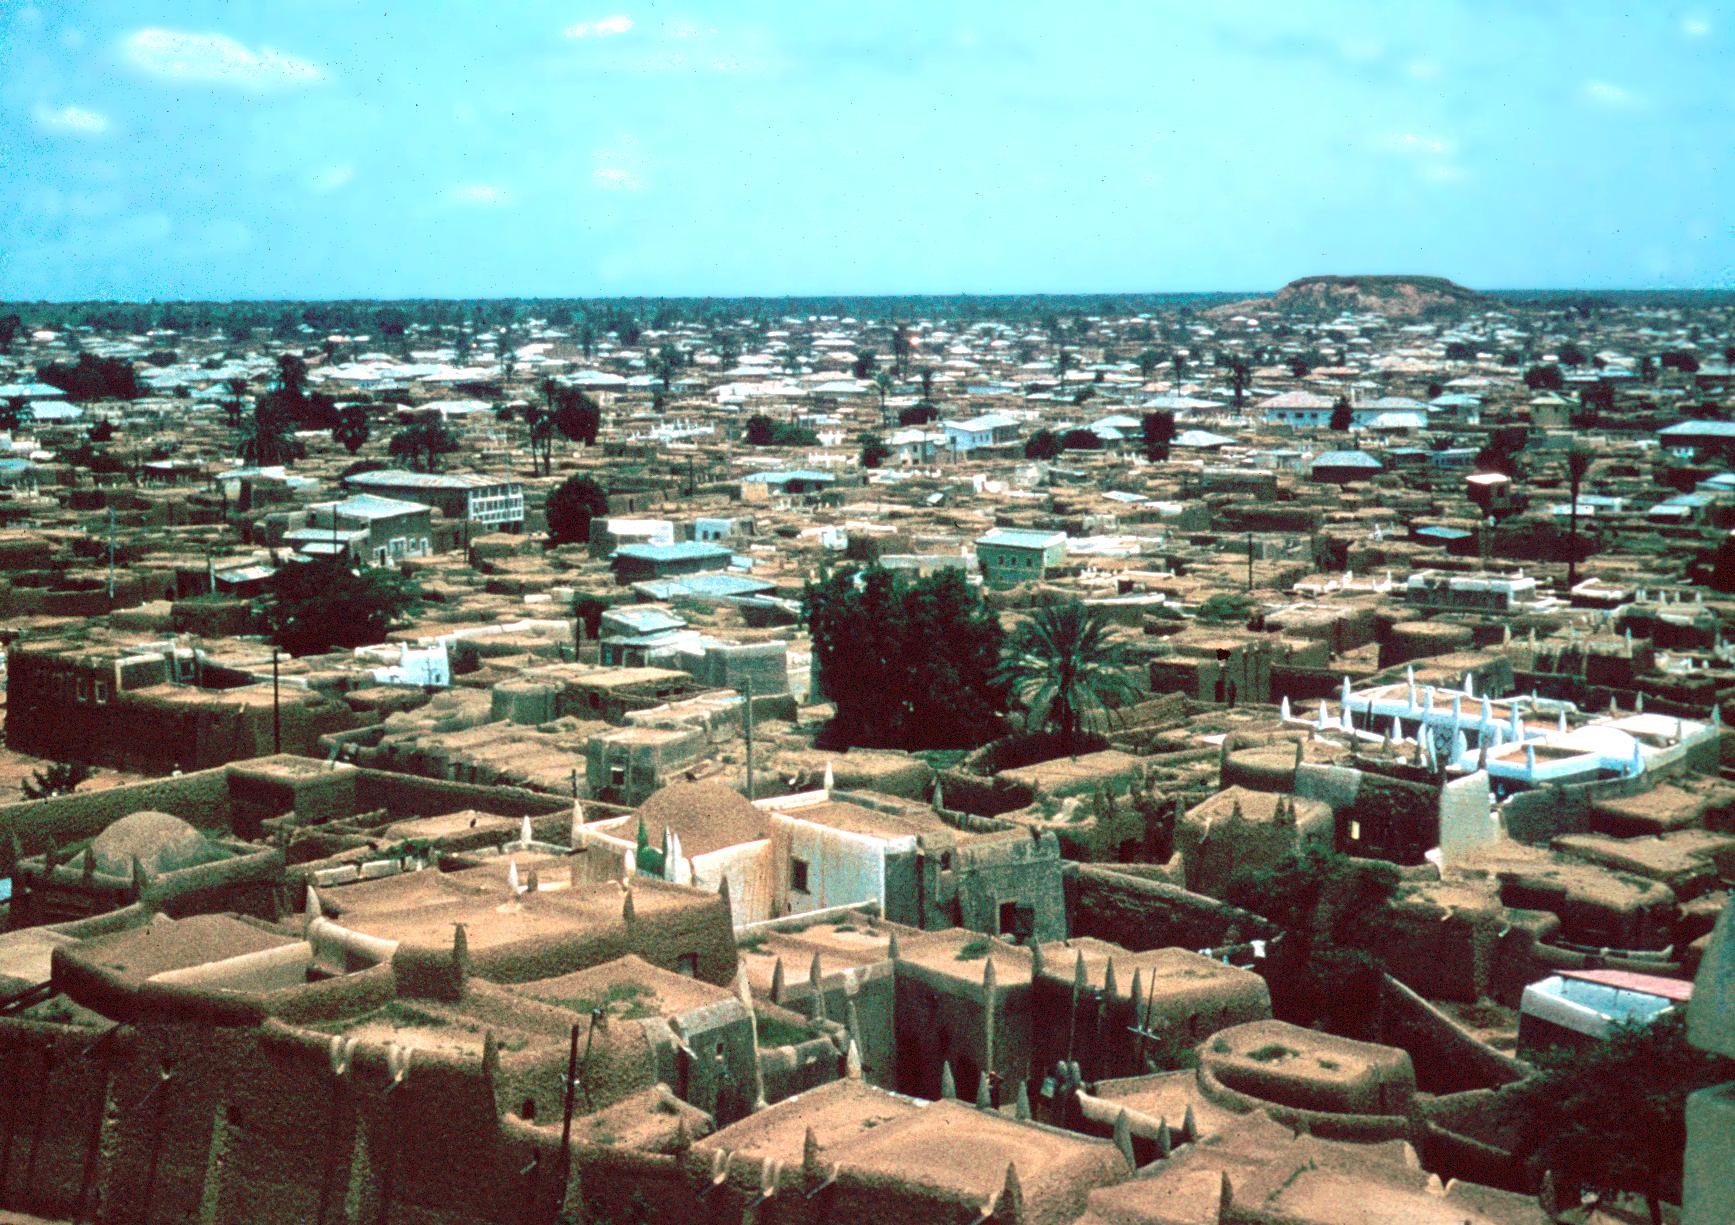 View of Kano from Minaret of Central Mosque